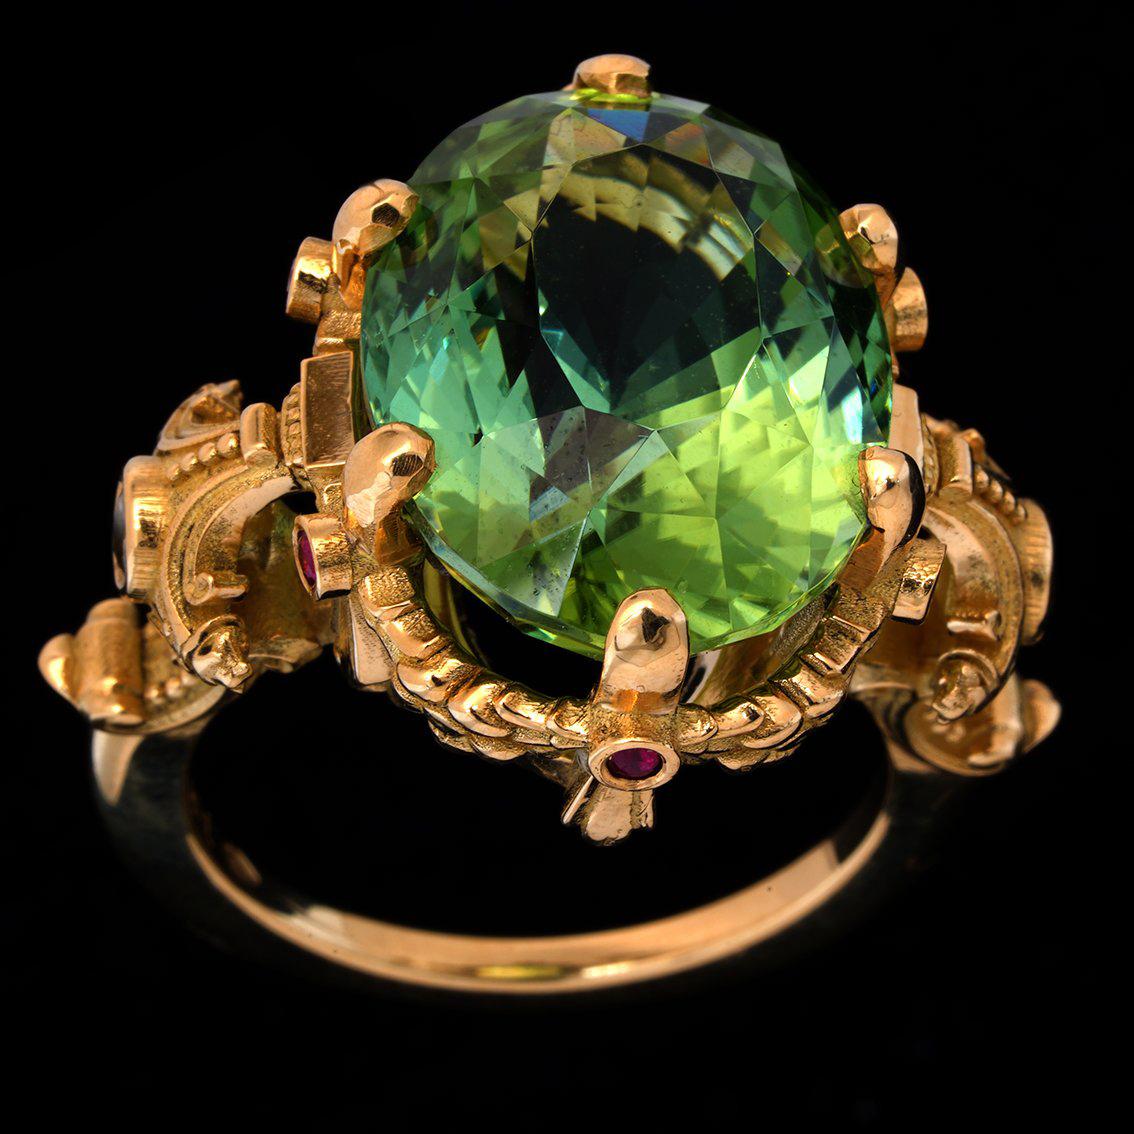 21ct Green Tourmaline, Rubies, Diamonds, & 18k Yellow Gold Antique Style Ring For Sale 2